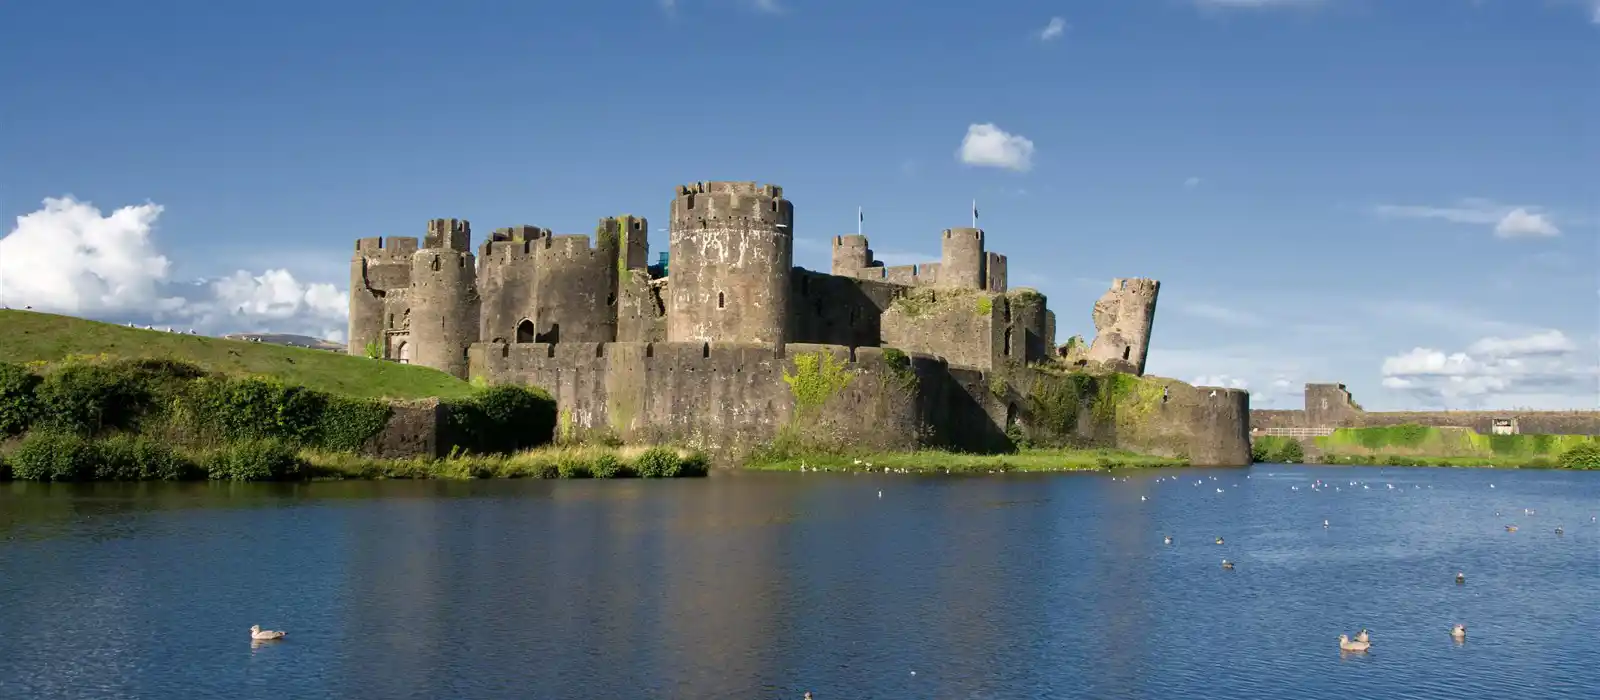 Caerphilly Castle in Wales